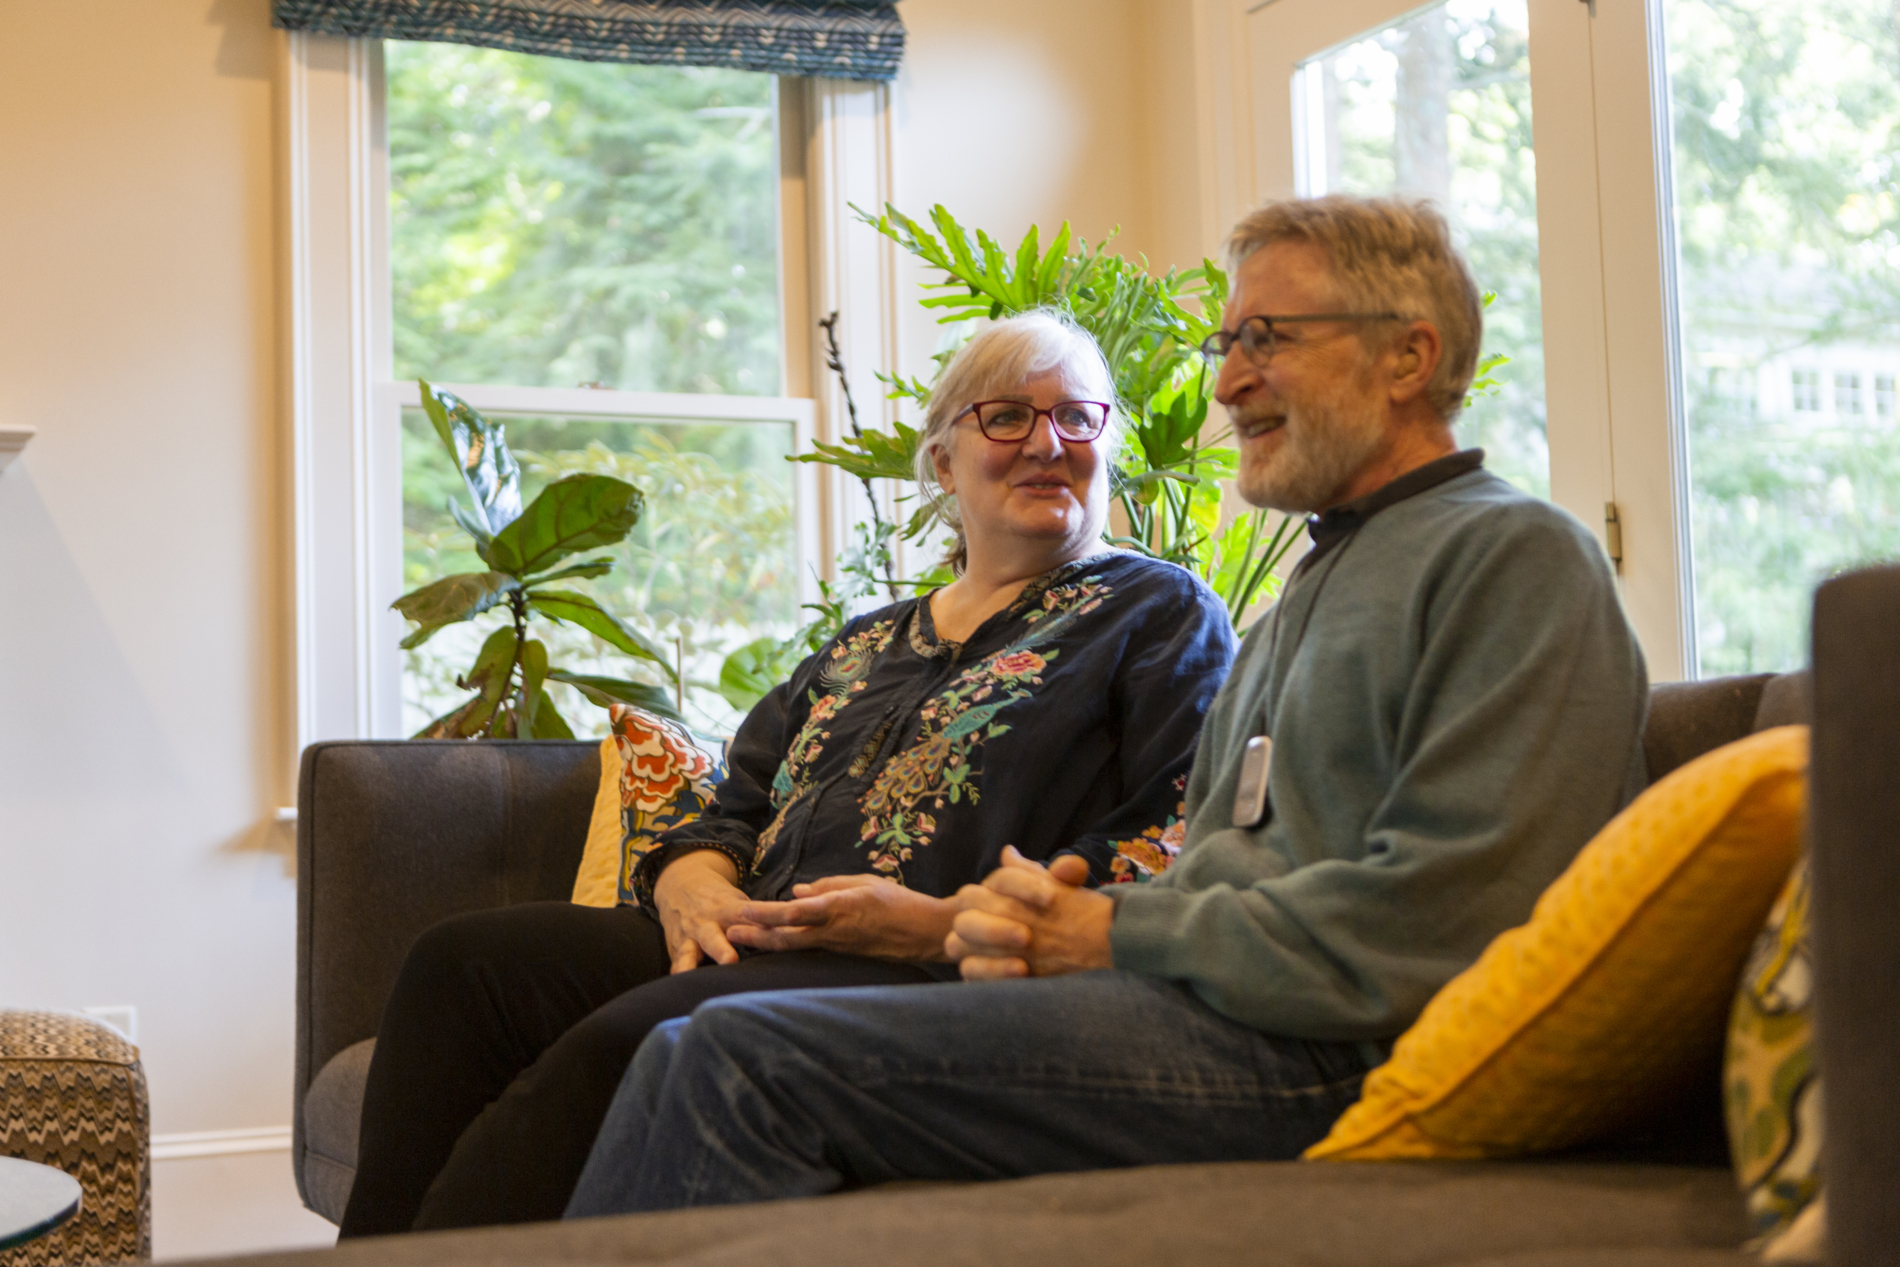 A man and woman talk while sitting in their living room